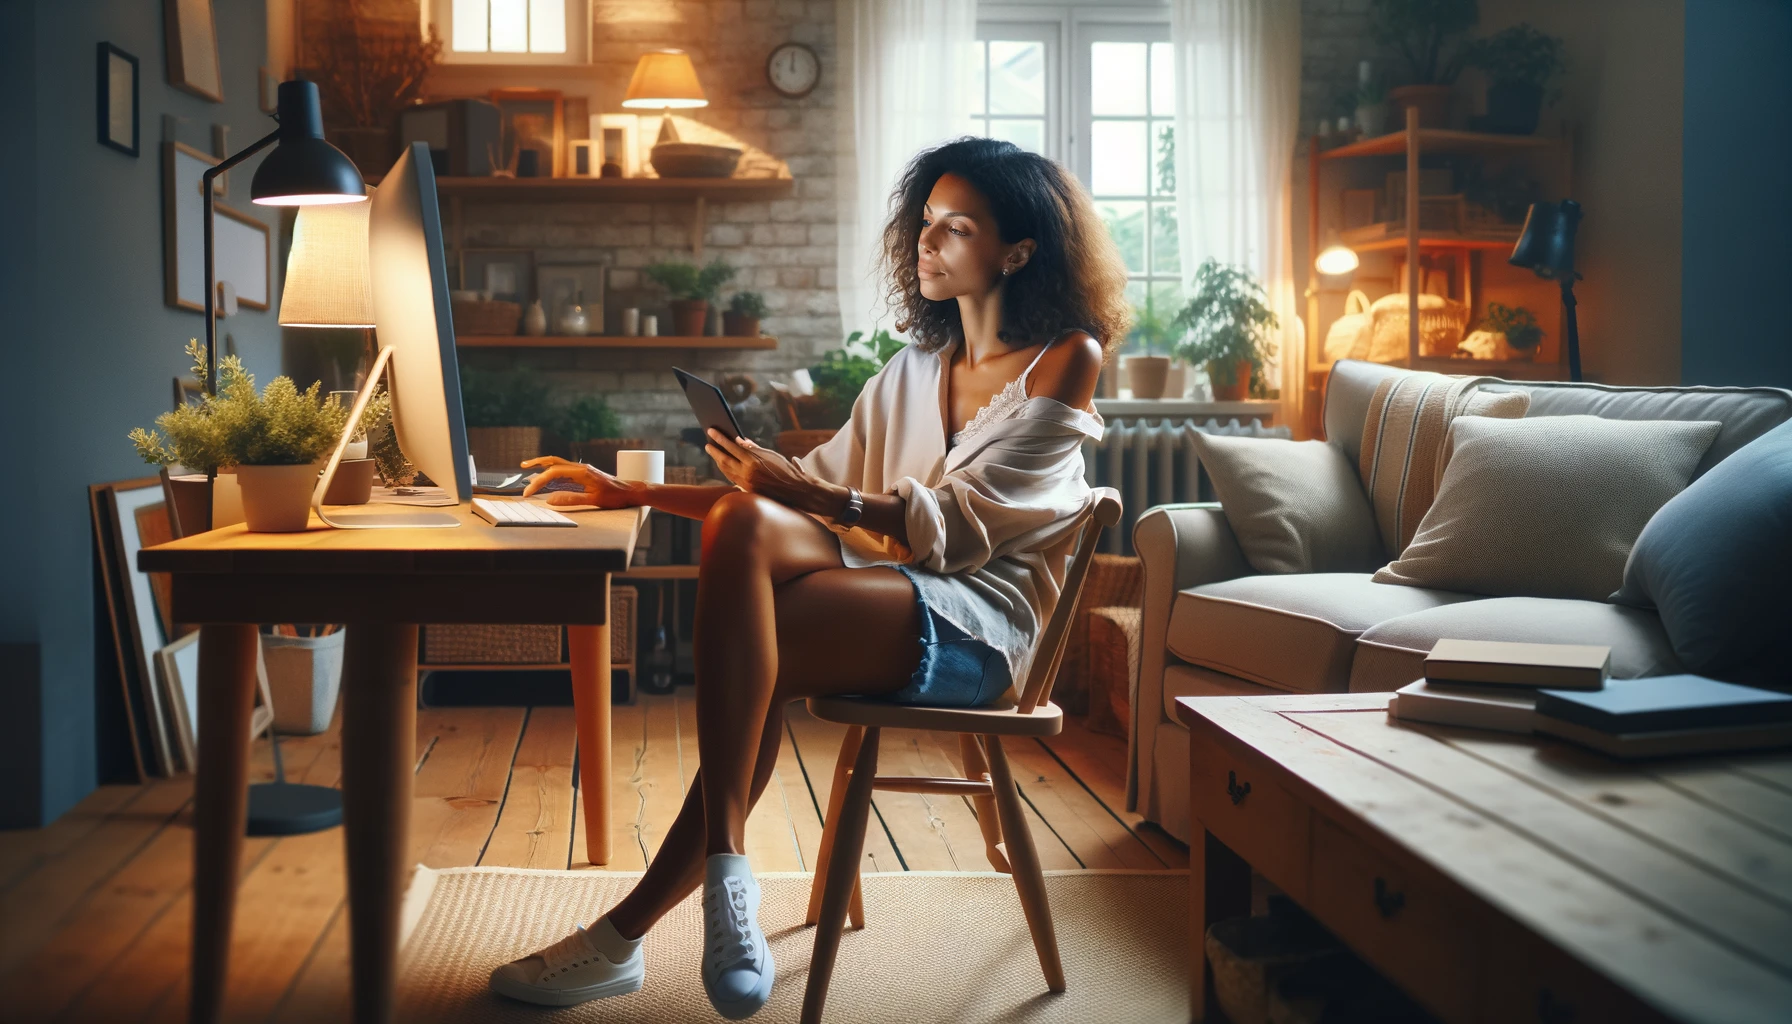 A female entrepreneur of mixed descent is casually seated at her computer in a cozy corner of her home, engaged in sourcing products to sell on Amazon. Her attire and posture are relaxed, embodying a more casual approach to her work. The room is warmly lit, with comfortable furnishings and personal touches that create a homely atmosphere. The scene captures the essence of a laid-back, yet productive work environment. The image should be photorealistic, reminiscent of a Canon EOS 5D Mark IV shot with a 50mm lens, maintaining a bright and welcoming ambiance with slight overexposure.